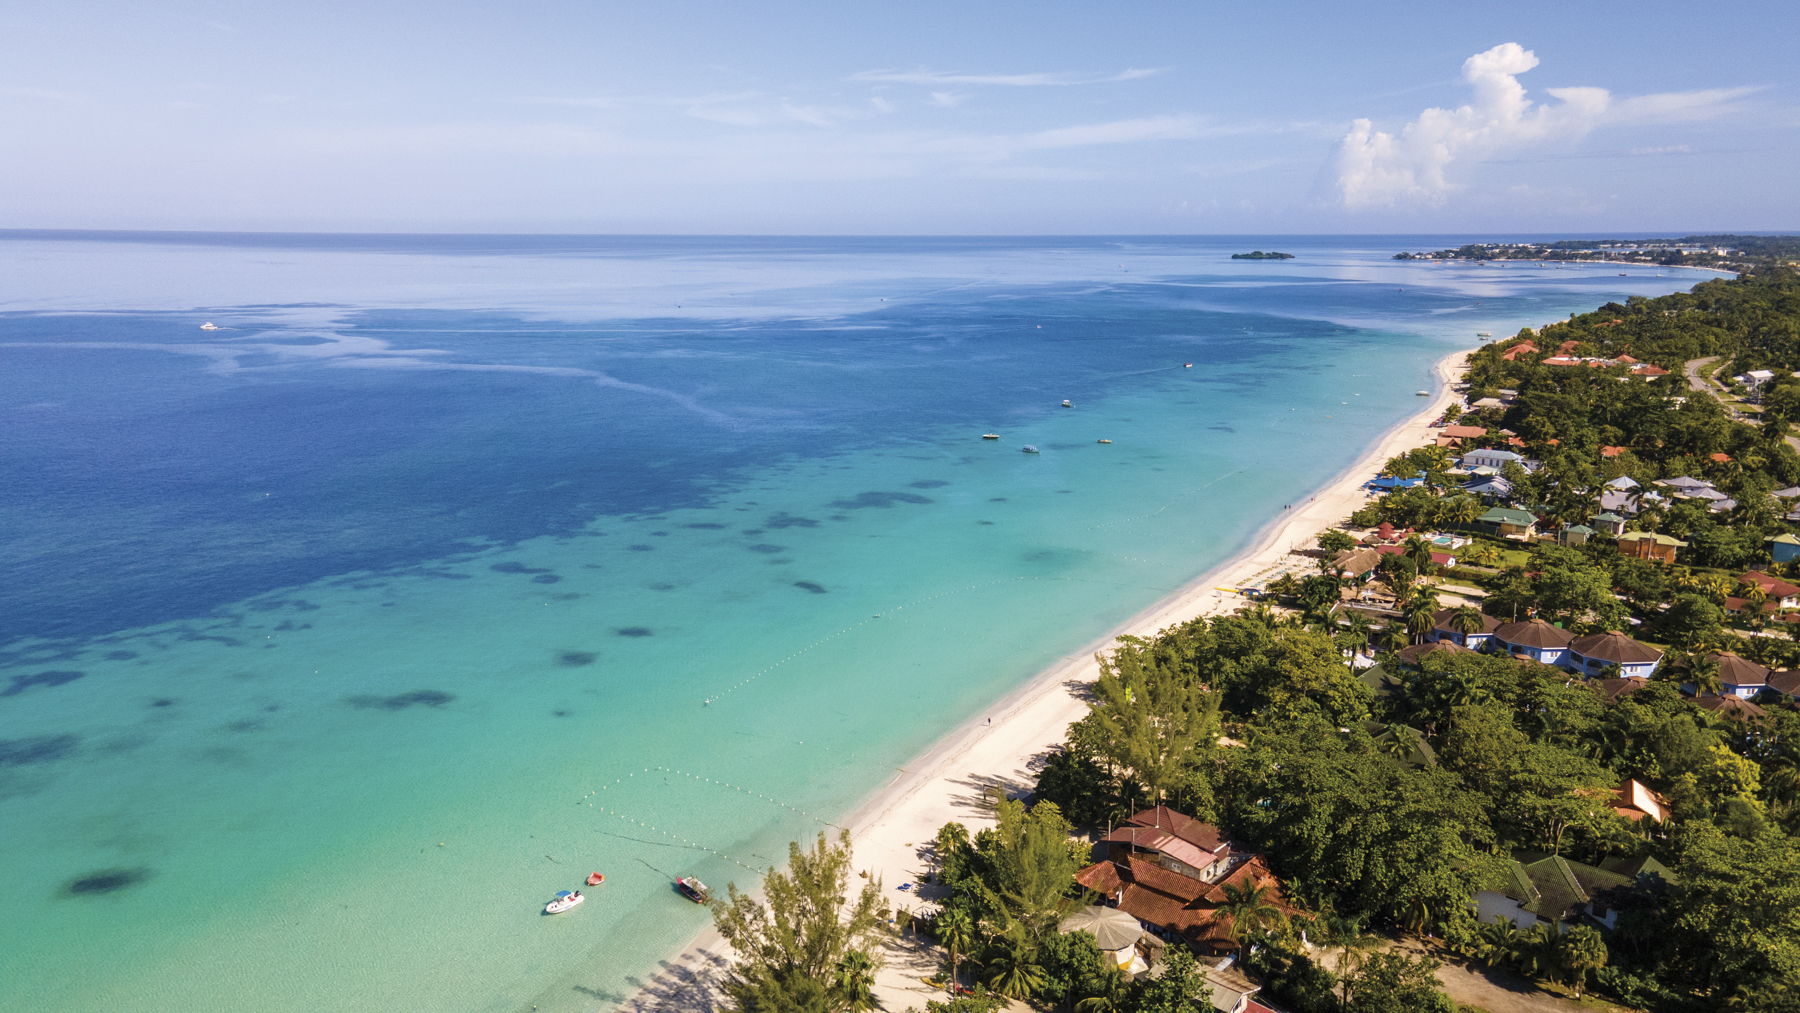 JAMAICA 2024: WHAT IS NEXT FOR THE CARIBBEAN’S LEADING TOURIST DESTINATION?